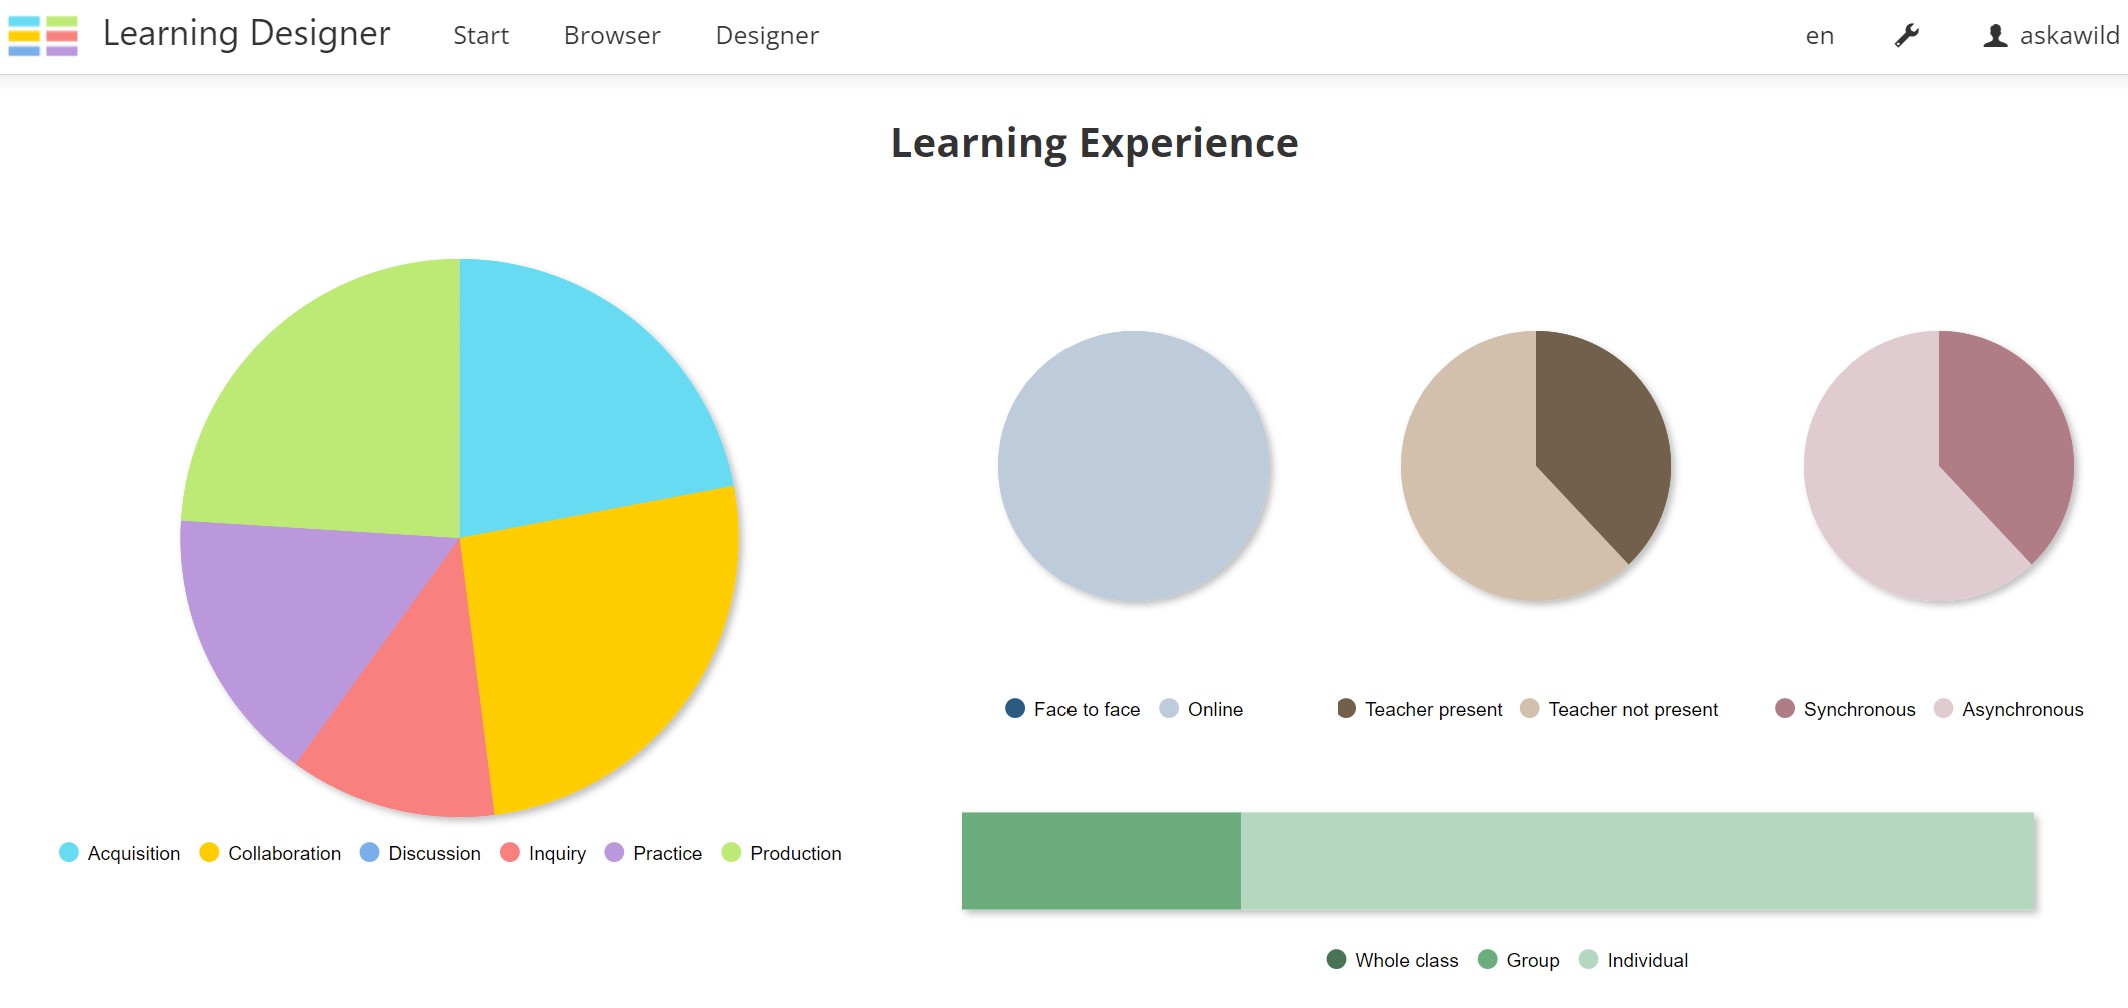 Screen shot of the Learning Designer tool showing the learner experience